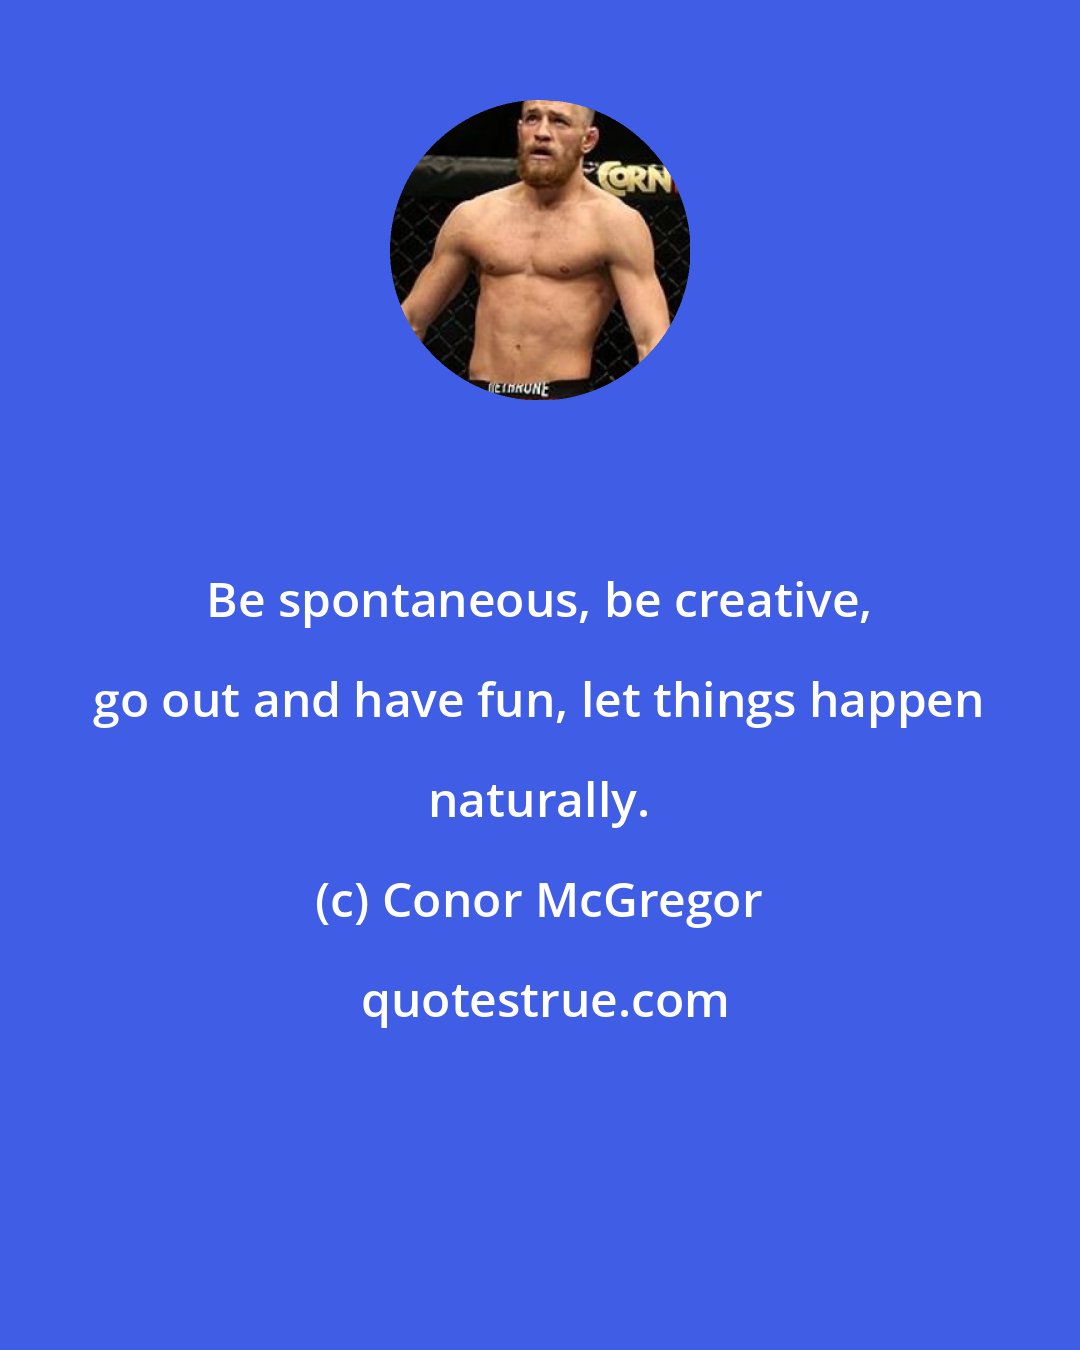 Conor McGregor: Be spontaneous, be creative, go out and have fun, let things happen naturally.